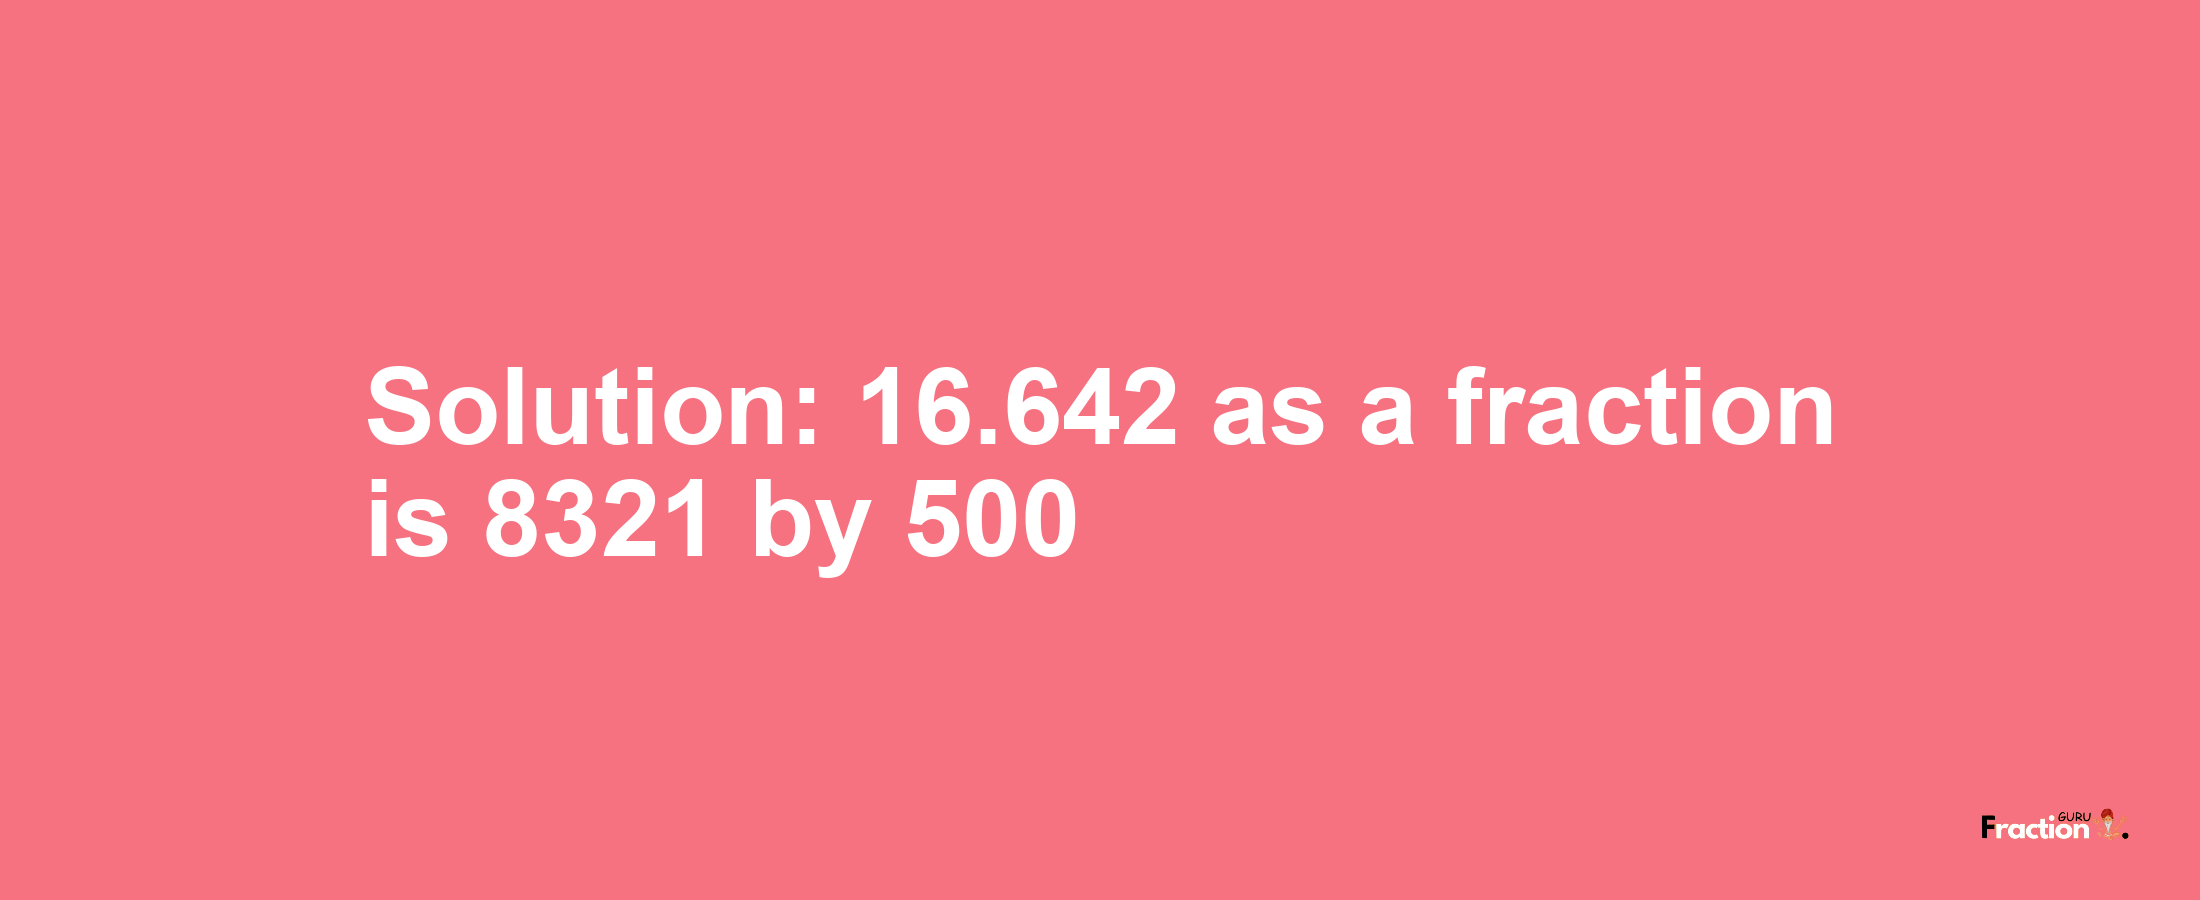 Solution:16.642 as a fraction is 8321/500